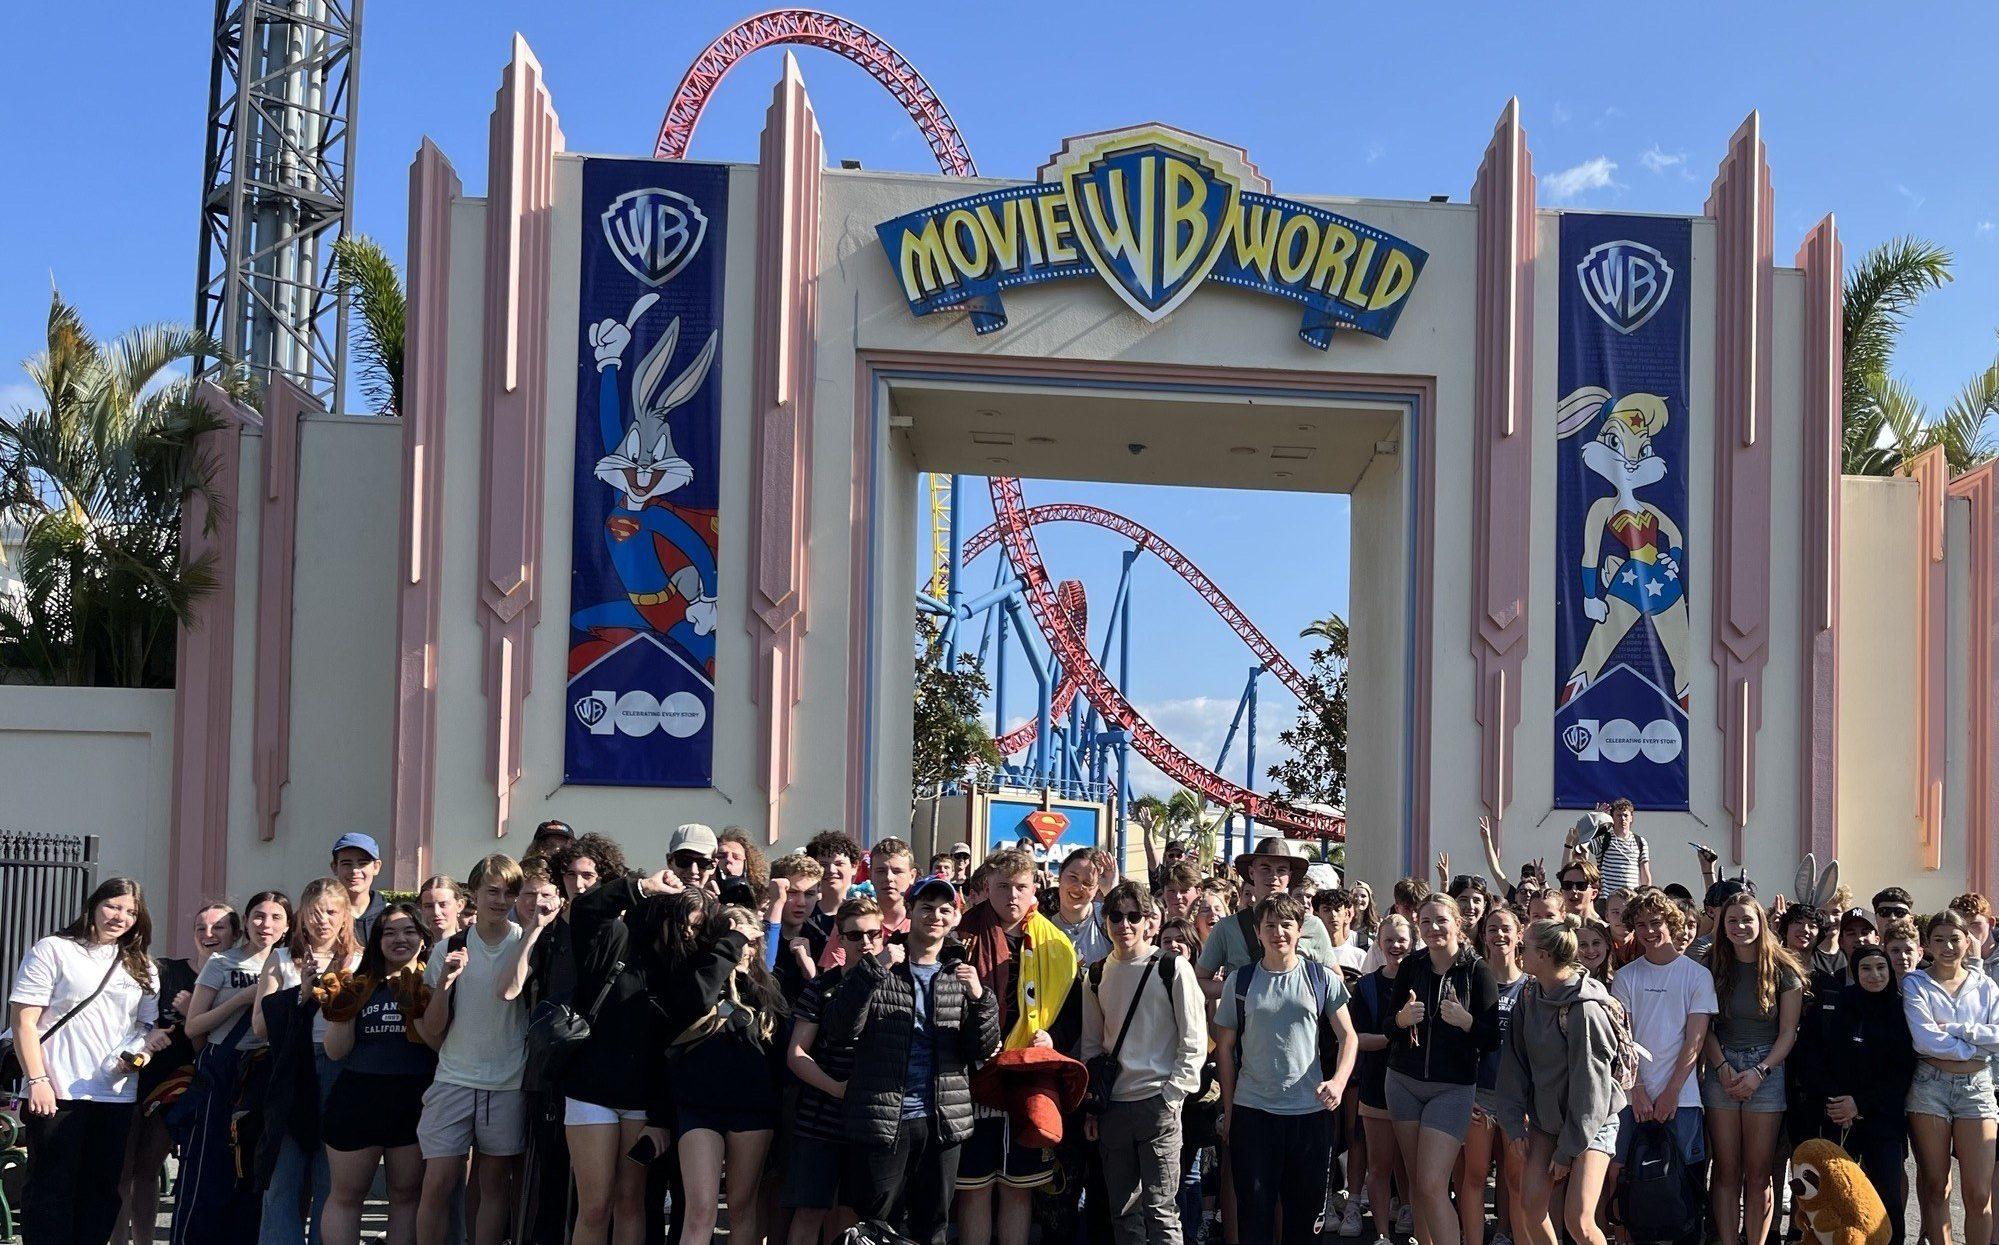 Students outside Movie world